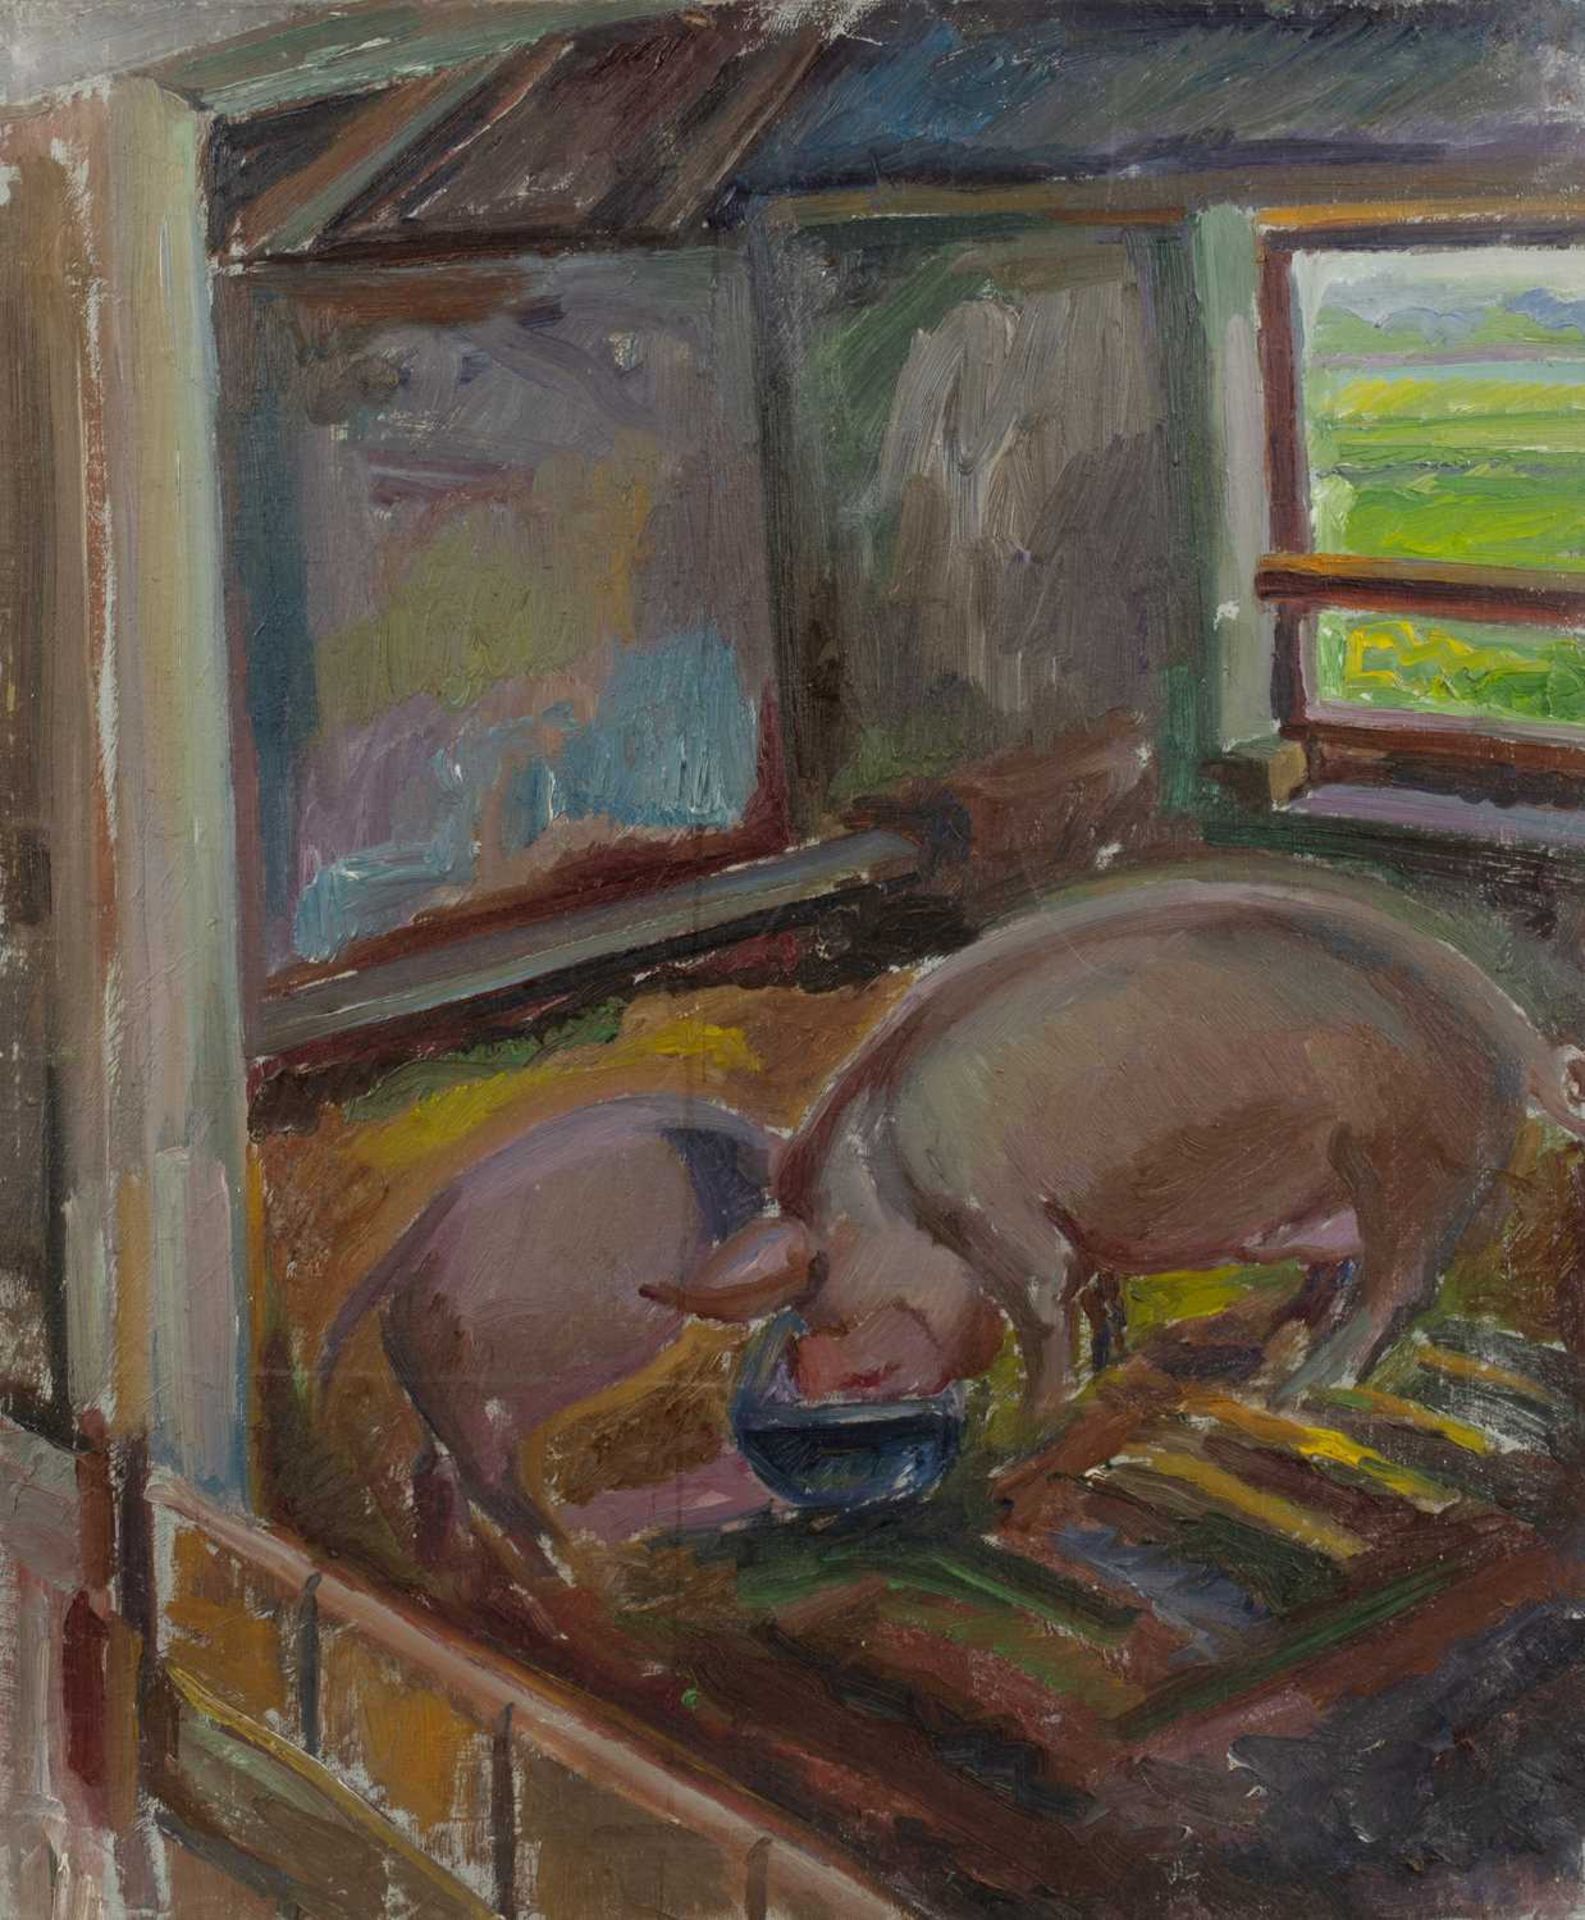 Harry Barr (1896-1987) Sow feeding from a trough with piglet alongside, oil on canvas, 61 x 51cm